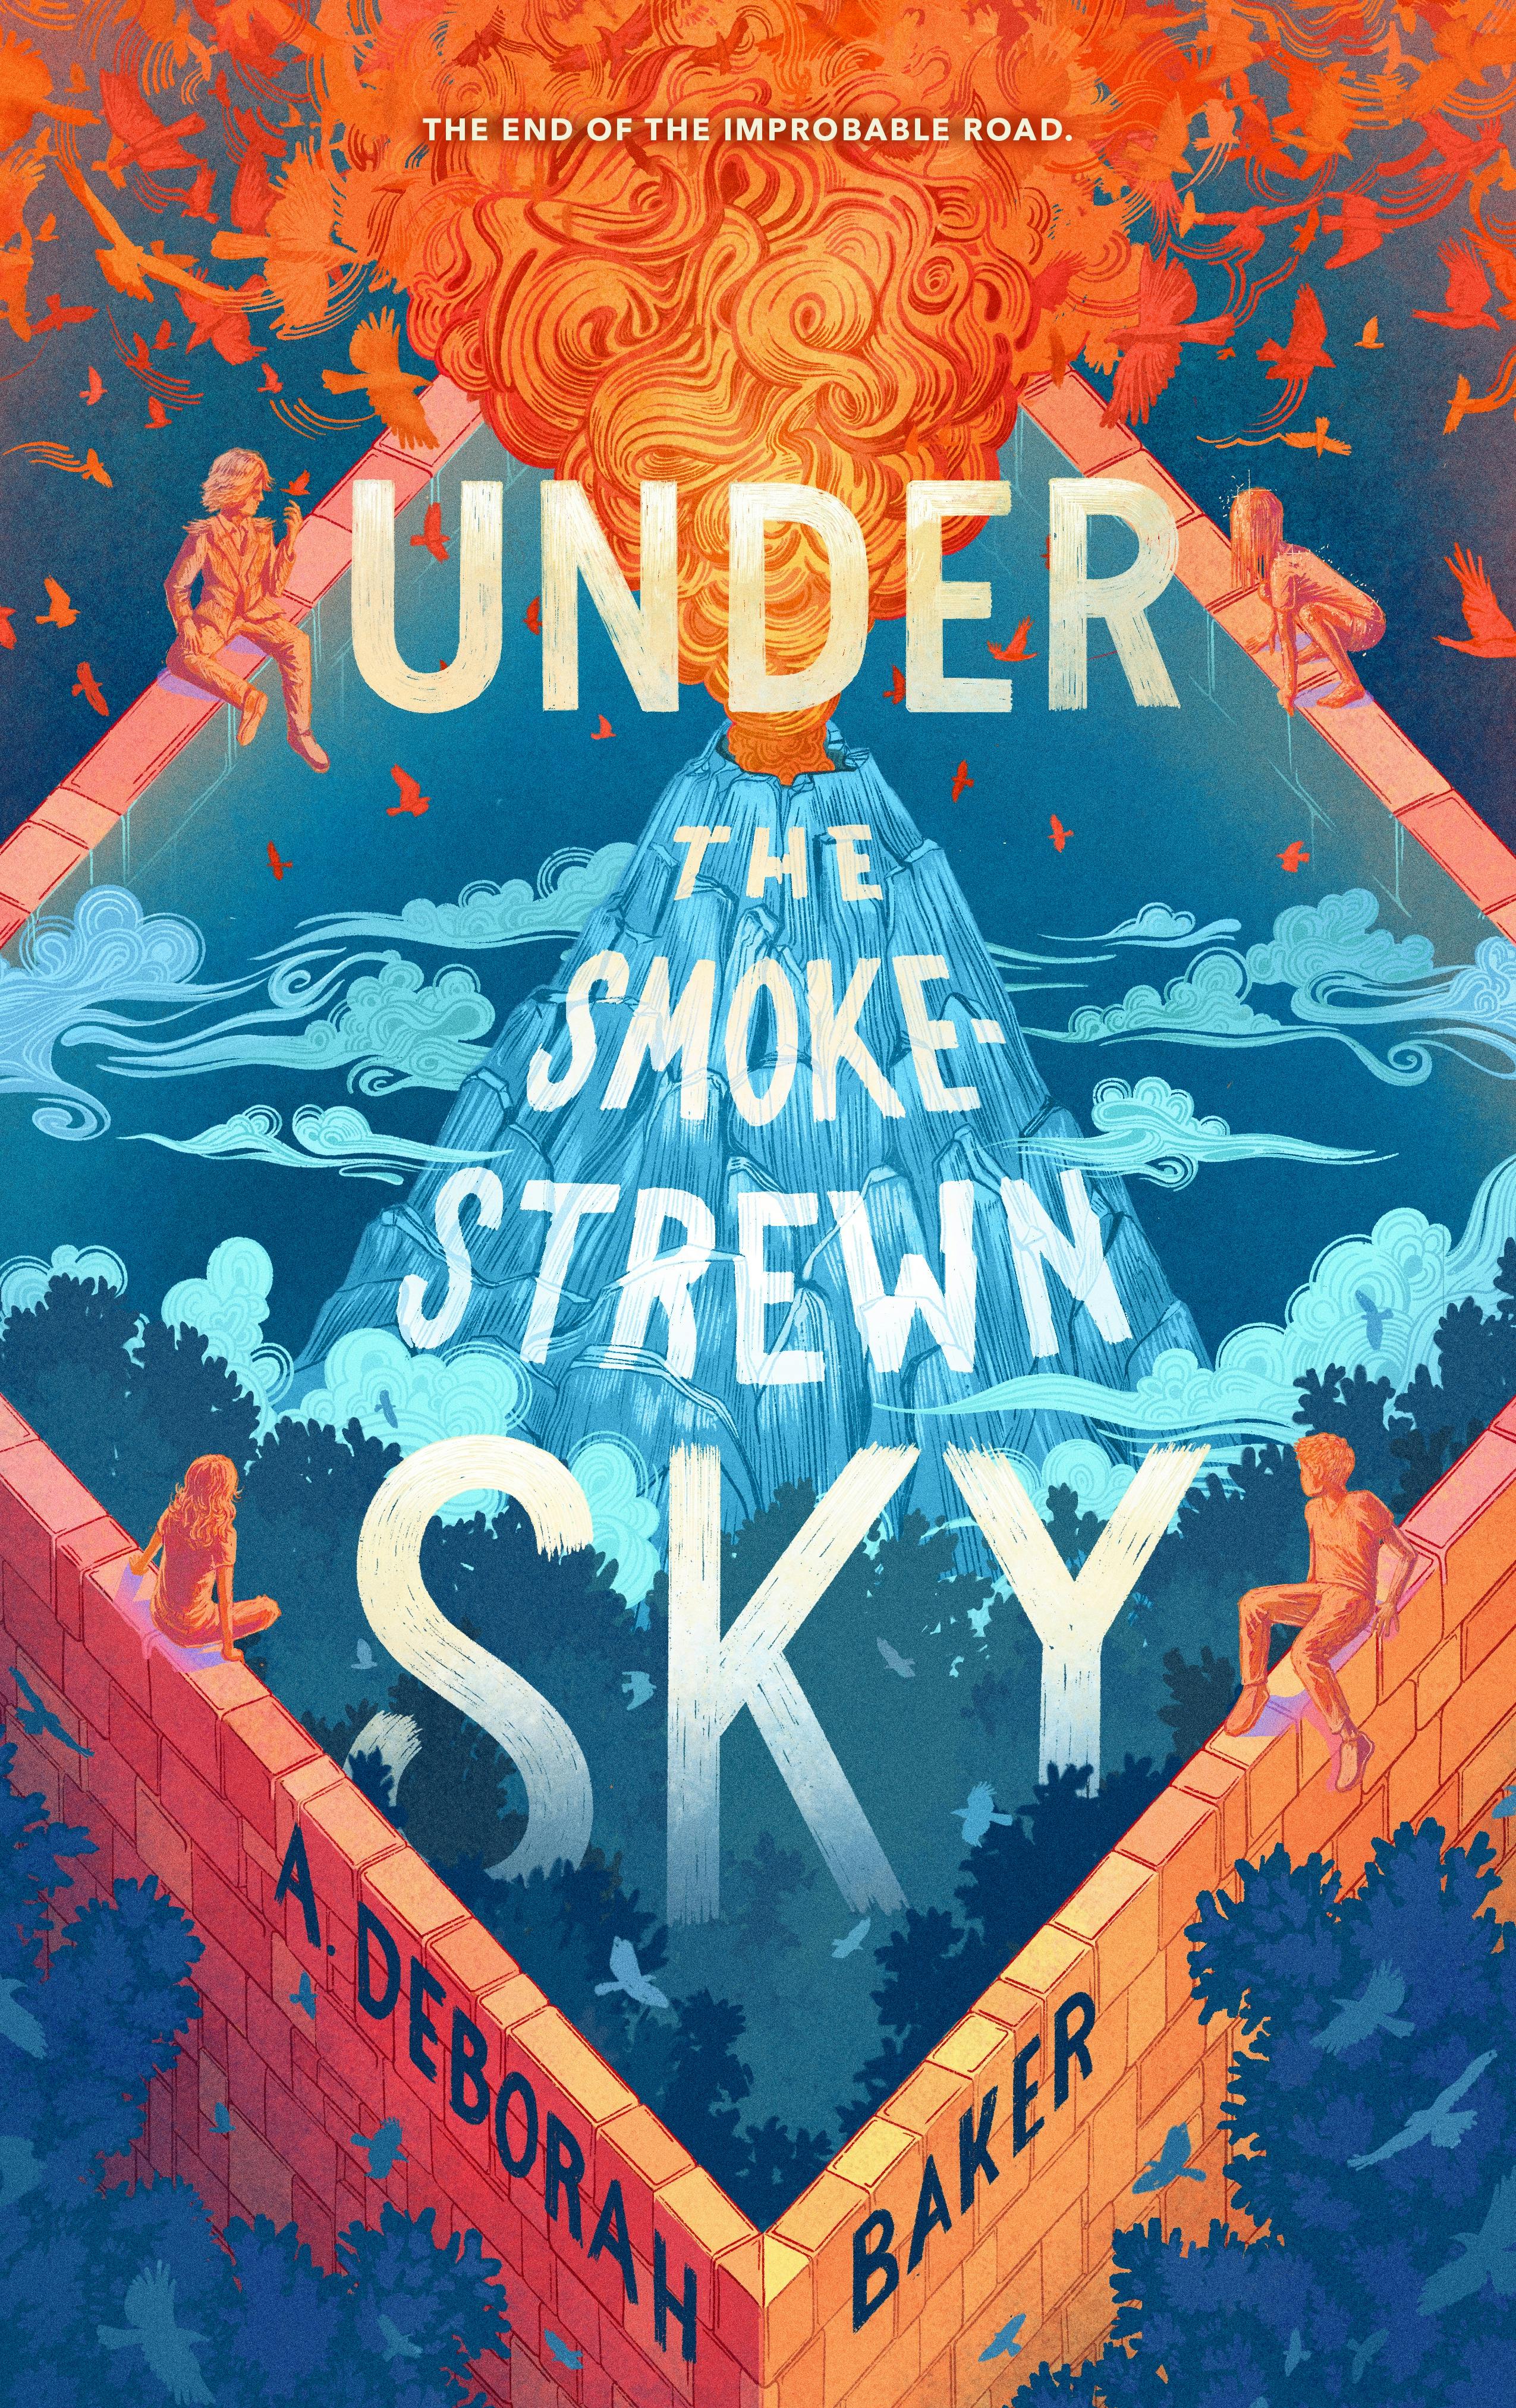 Cover for the book titled as: Under the Smokestrewn Sky